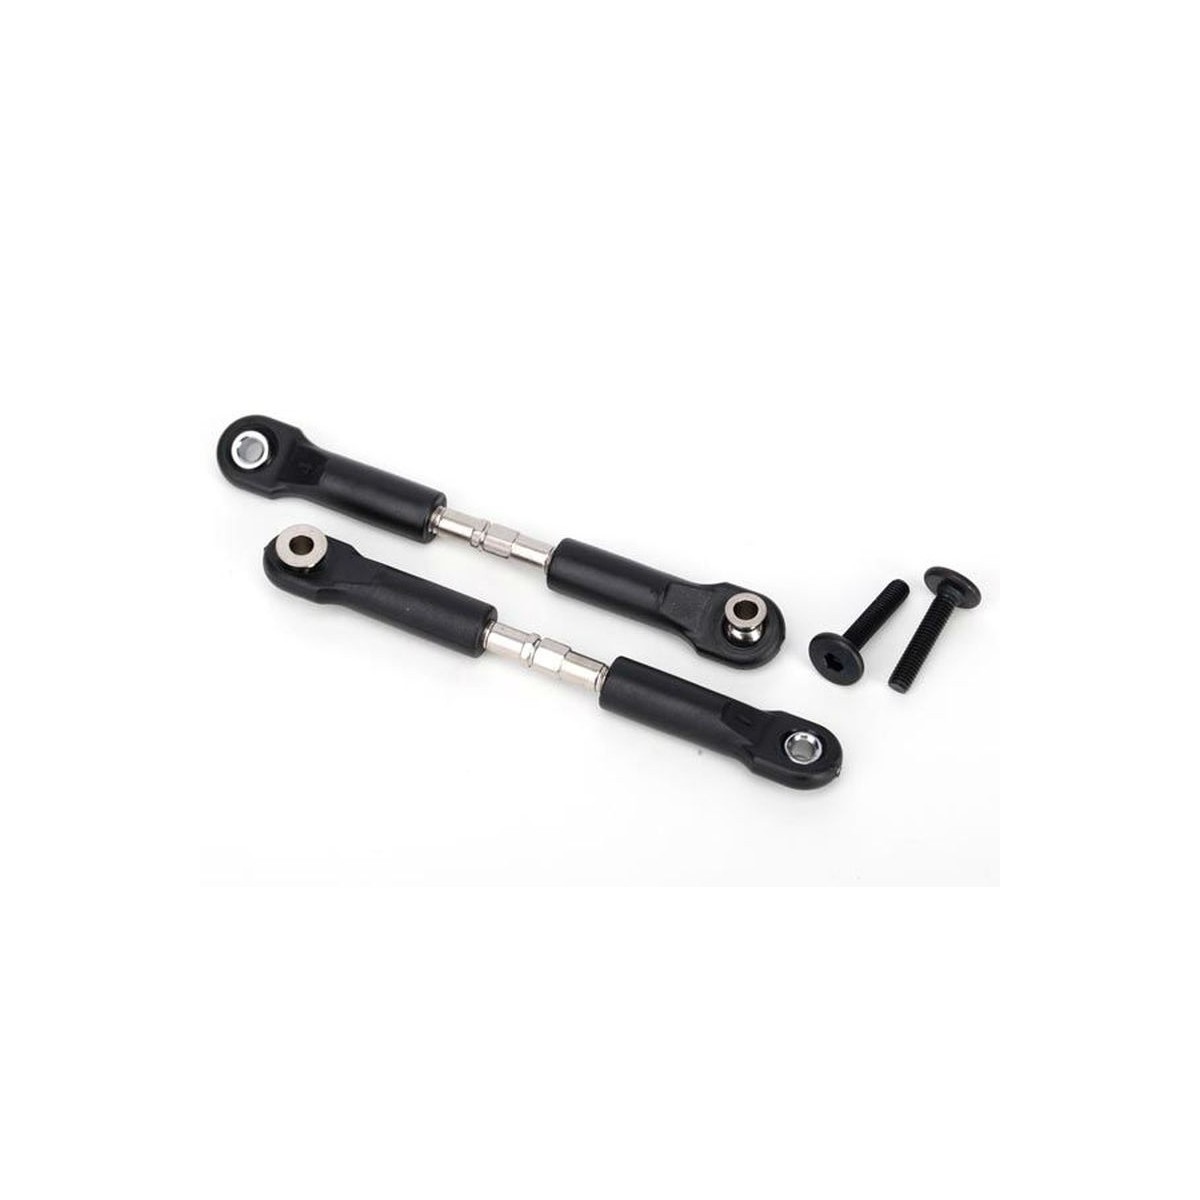 Traxxas 2444 Turnbuckles Camber Links with Rod Ends 47mm pair 